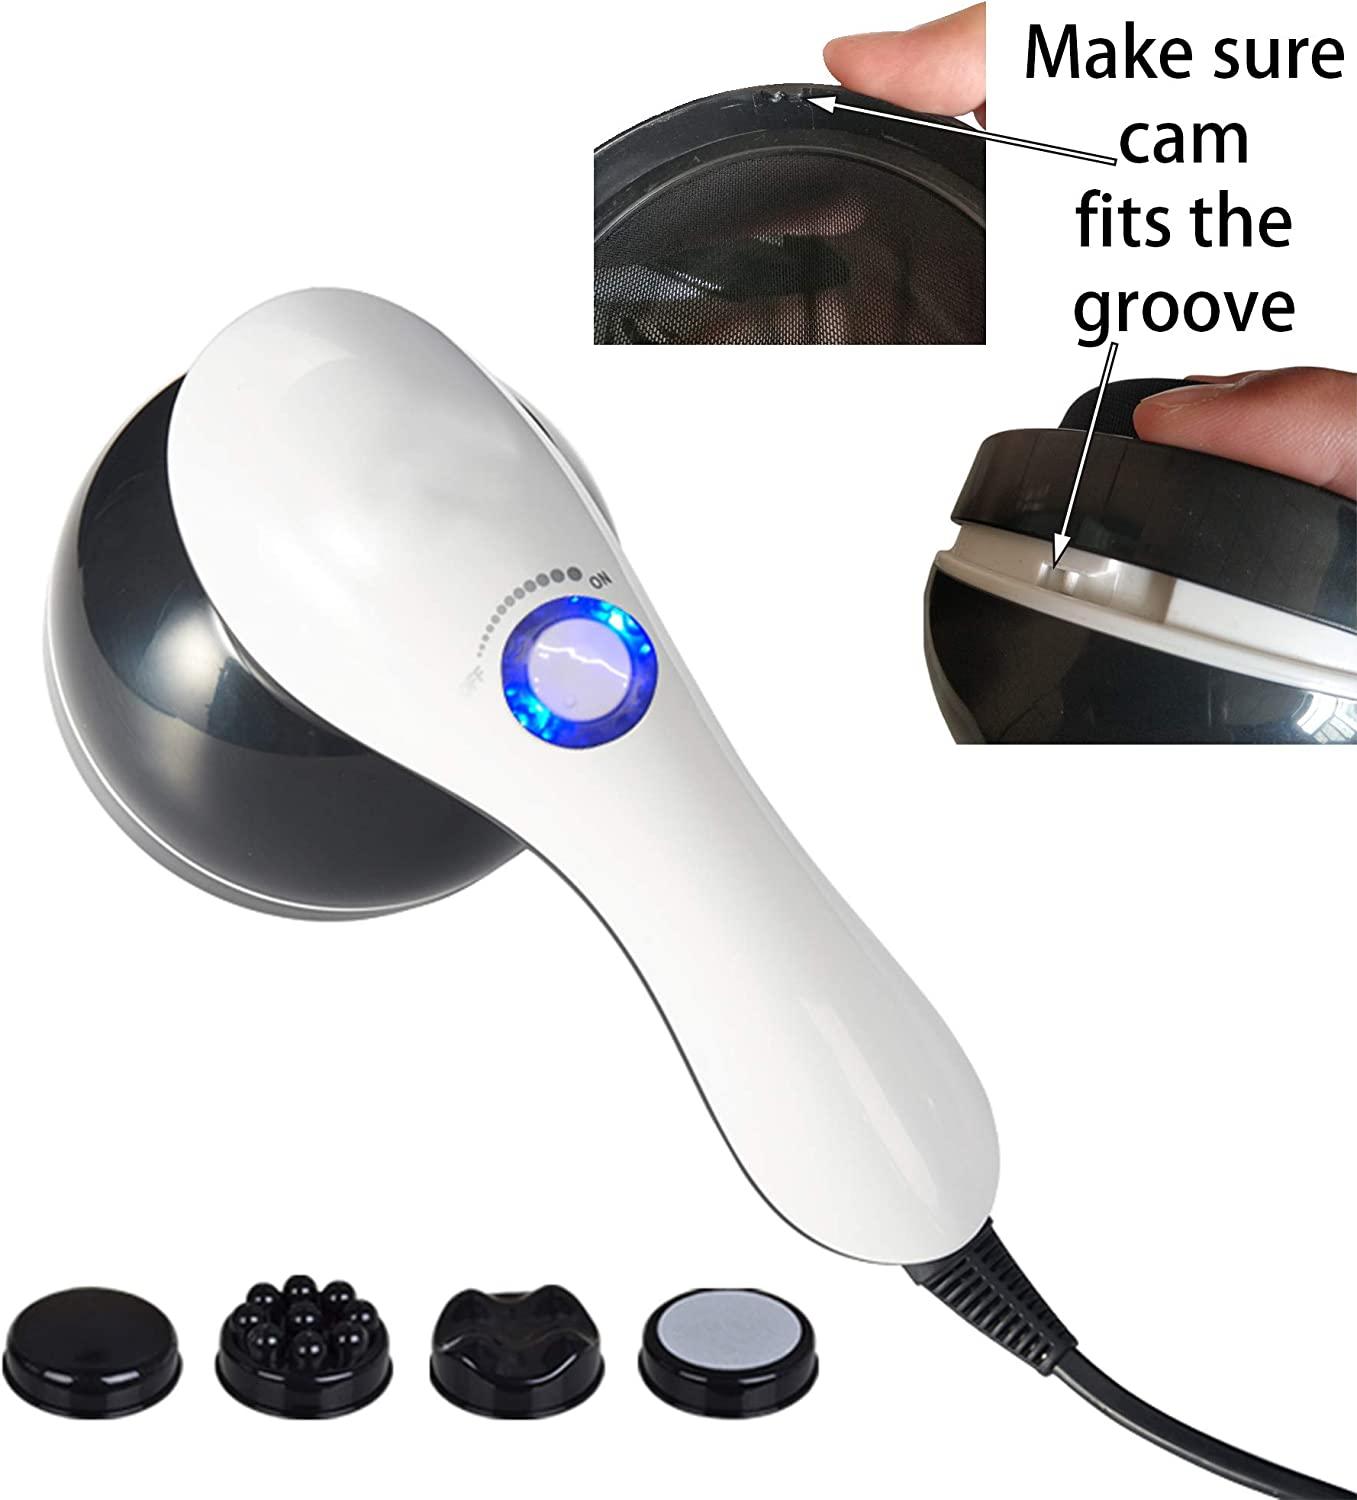 Multi-Purpose Low Frequency Wave Health Care Massager Equipment, Portable Low  Frequency Massage